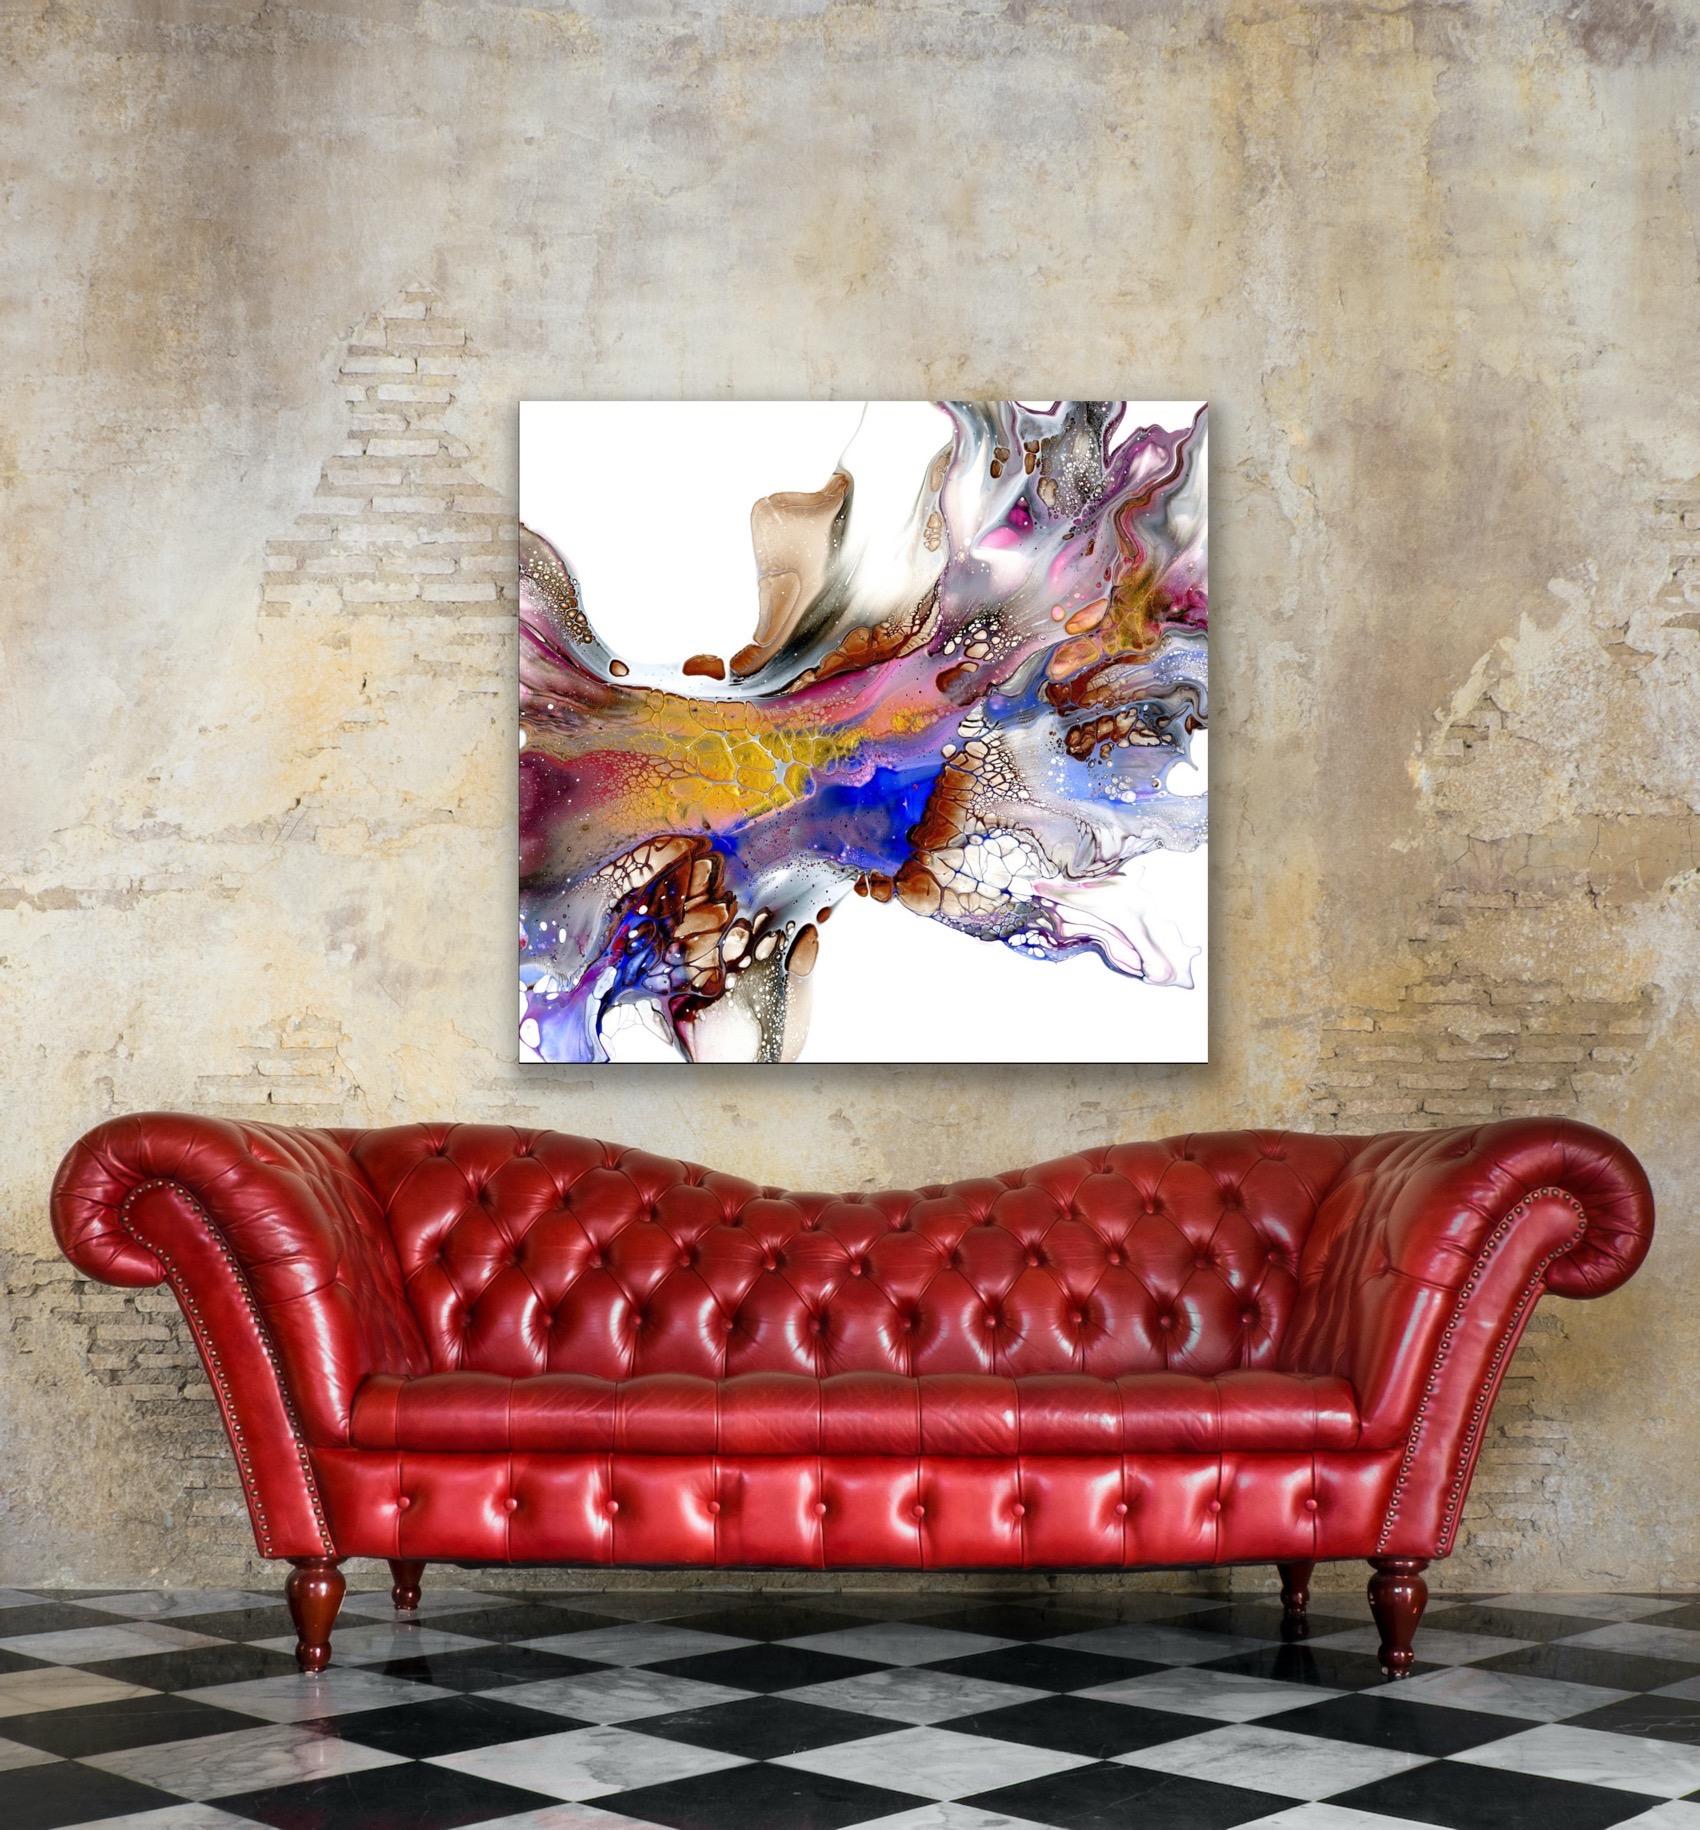 Contemporary Modern Large Indoor Outdoor Giclee Print, LE Signed by artist. For Sale 2